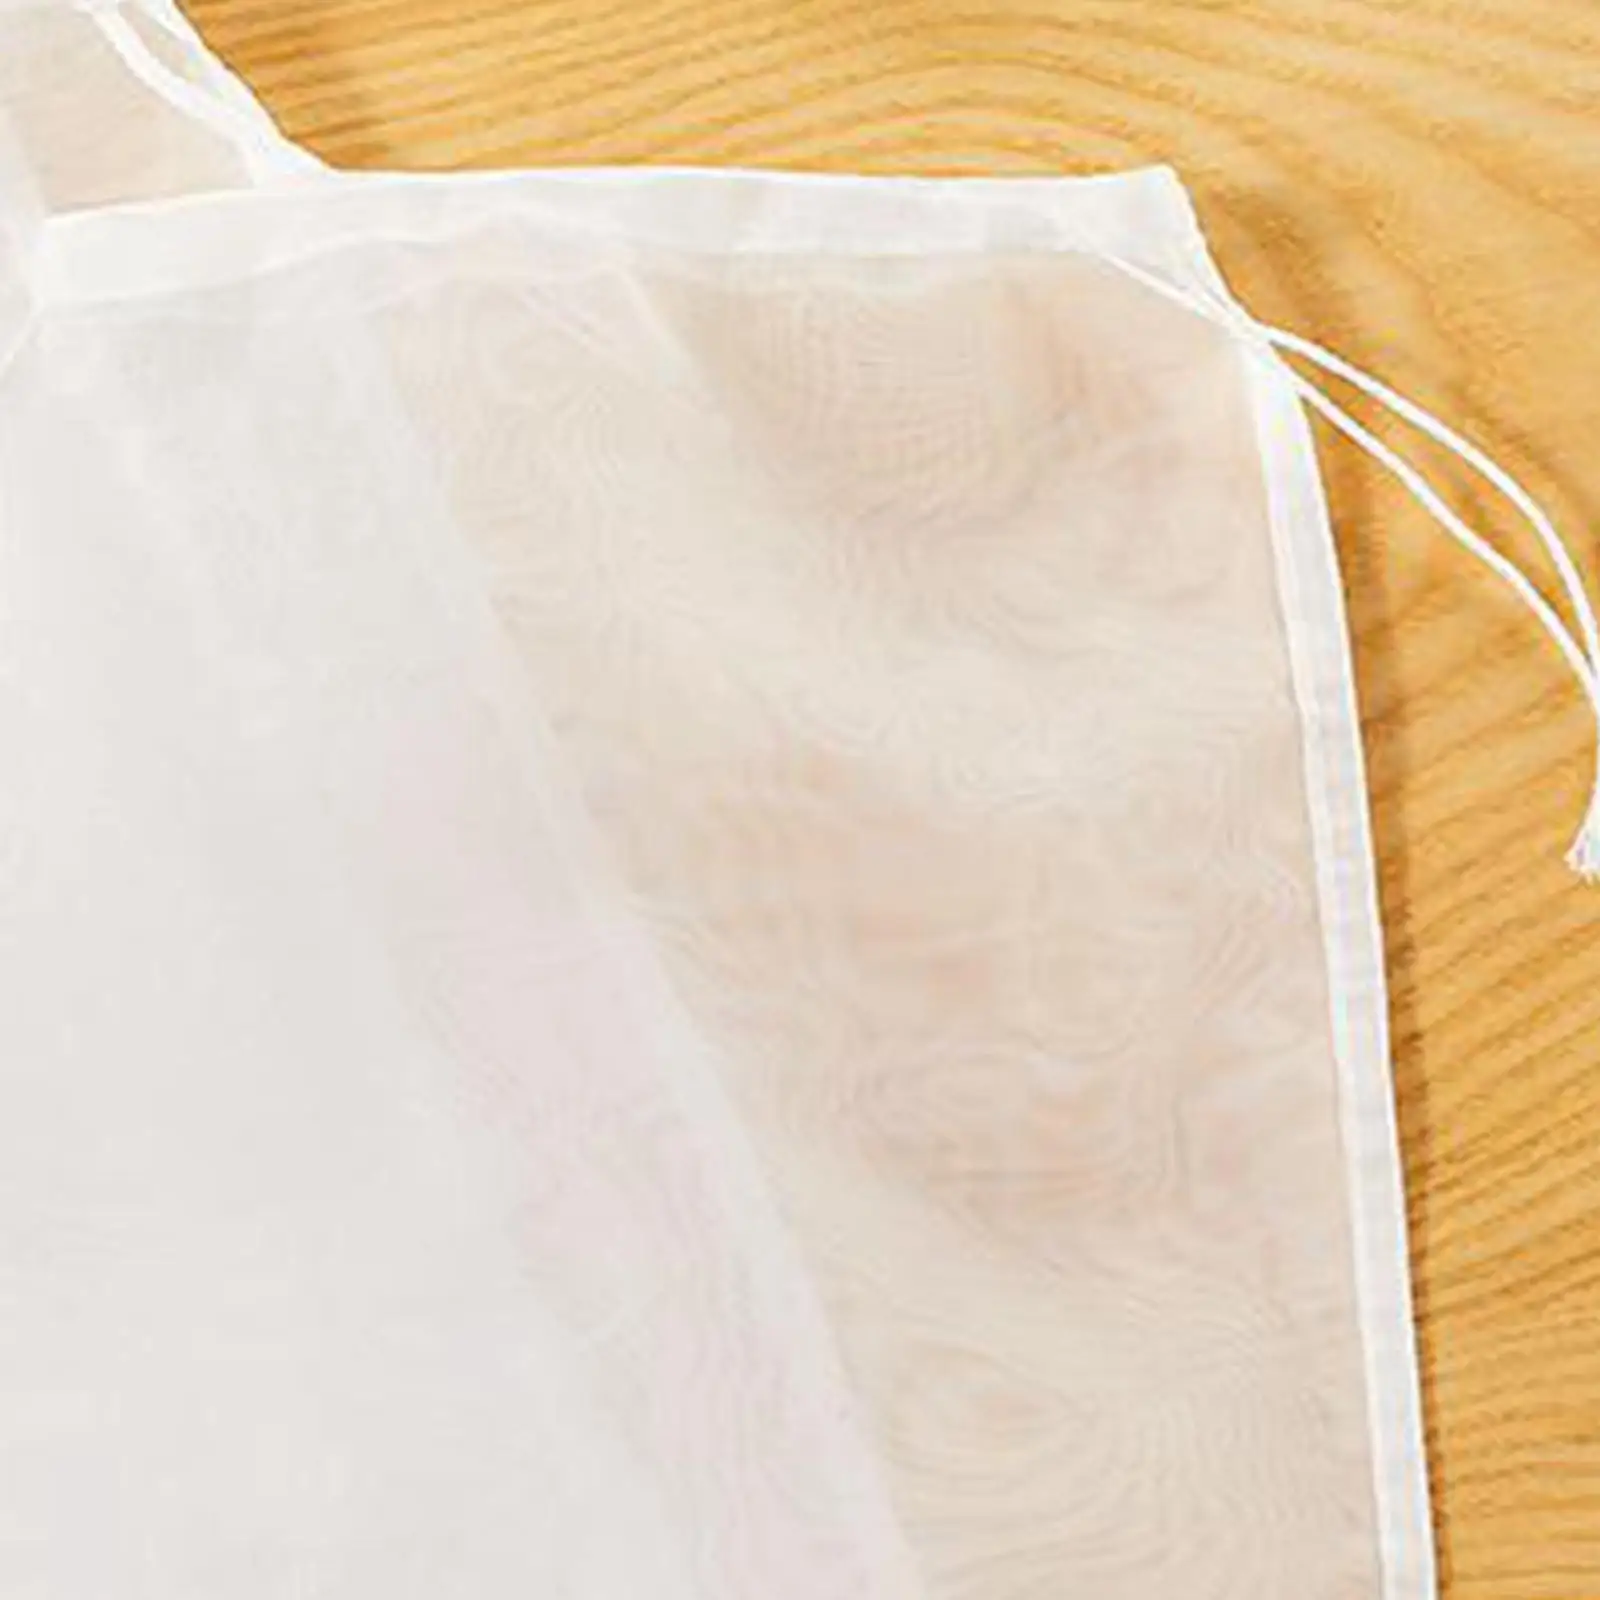 Nut Milk Bag with Drawstring Cheesecloth Filter Bag Unbeached Reusable for Soy Brew Coffee Soup Nut Milk 11.81`` x 7.87``